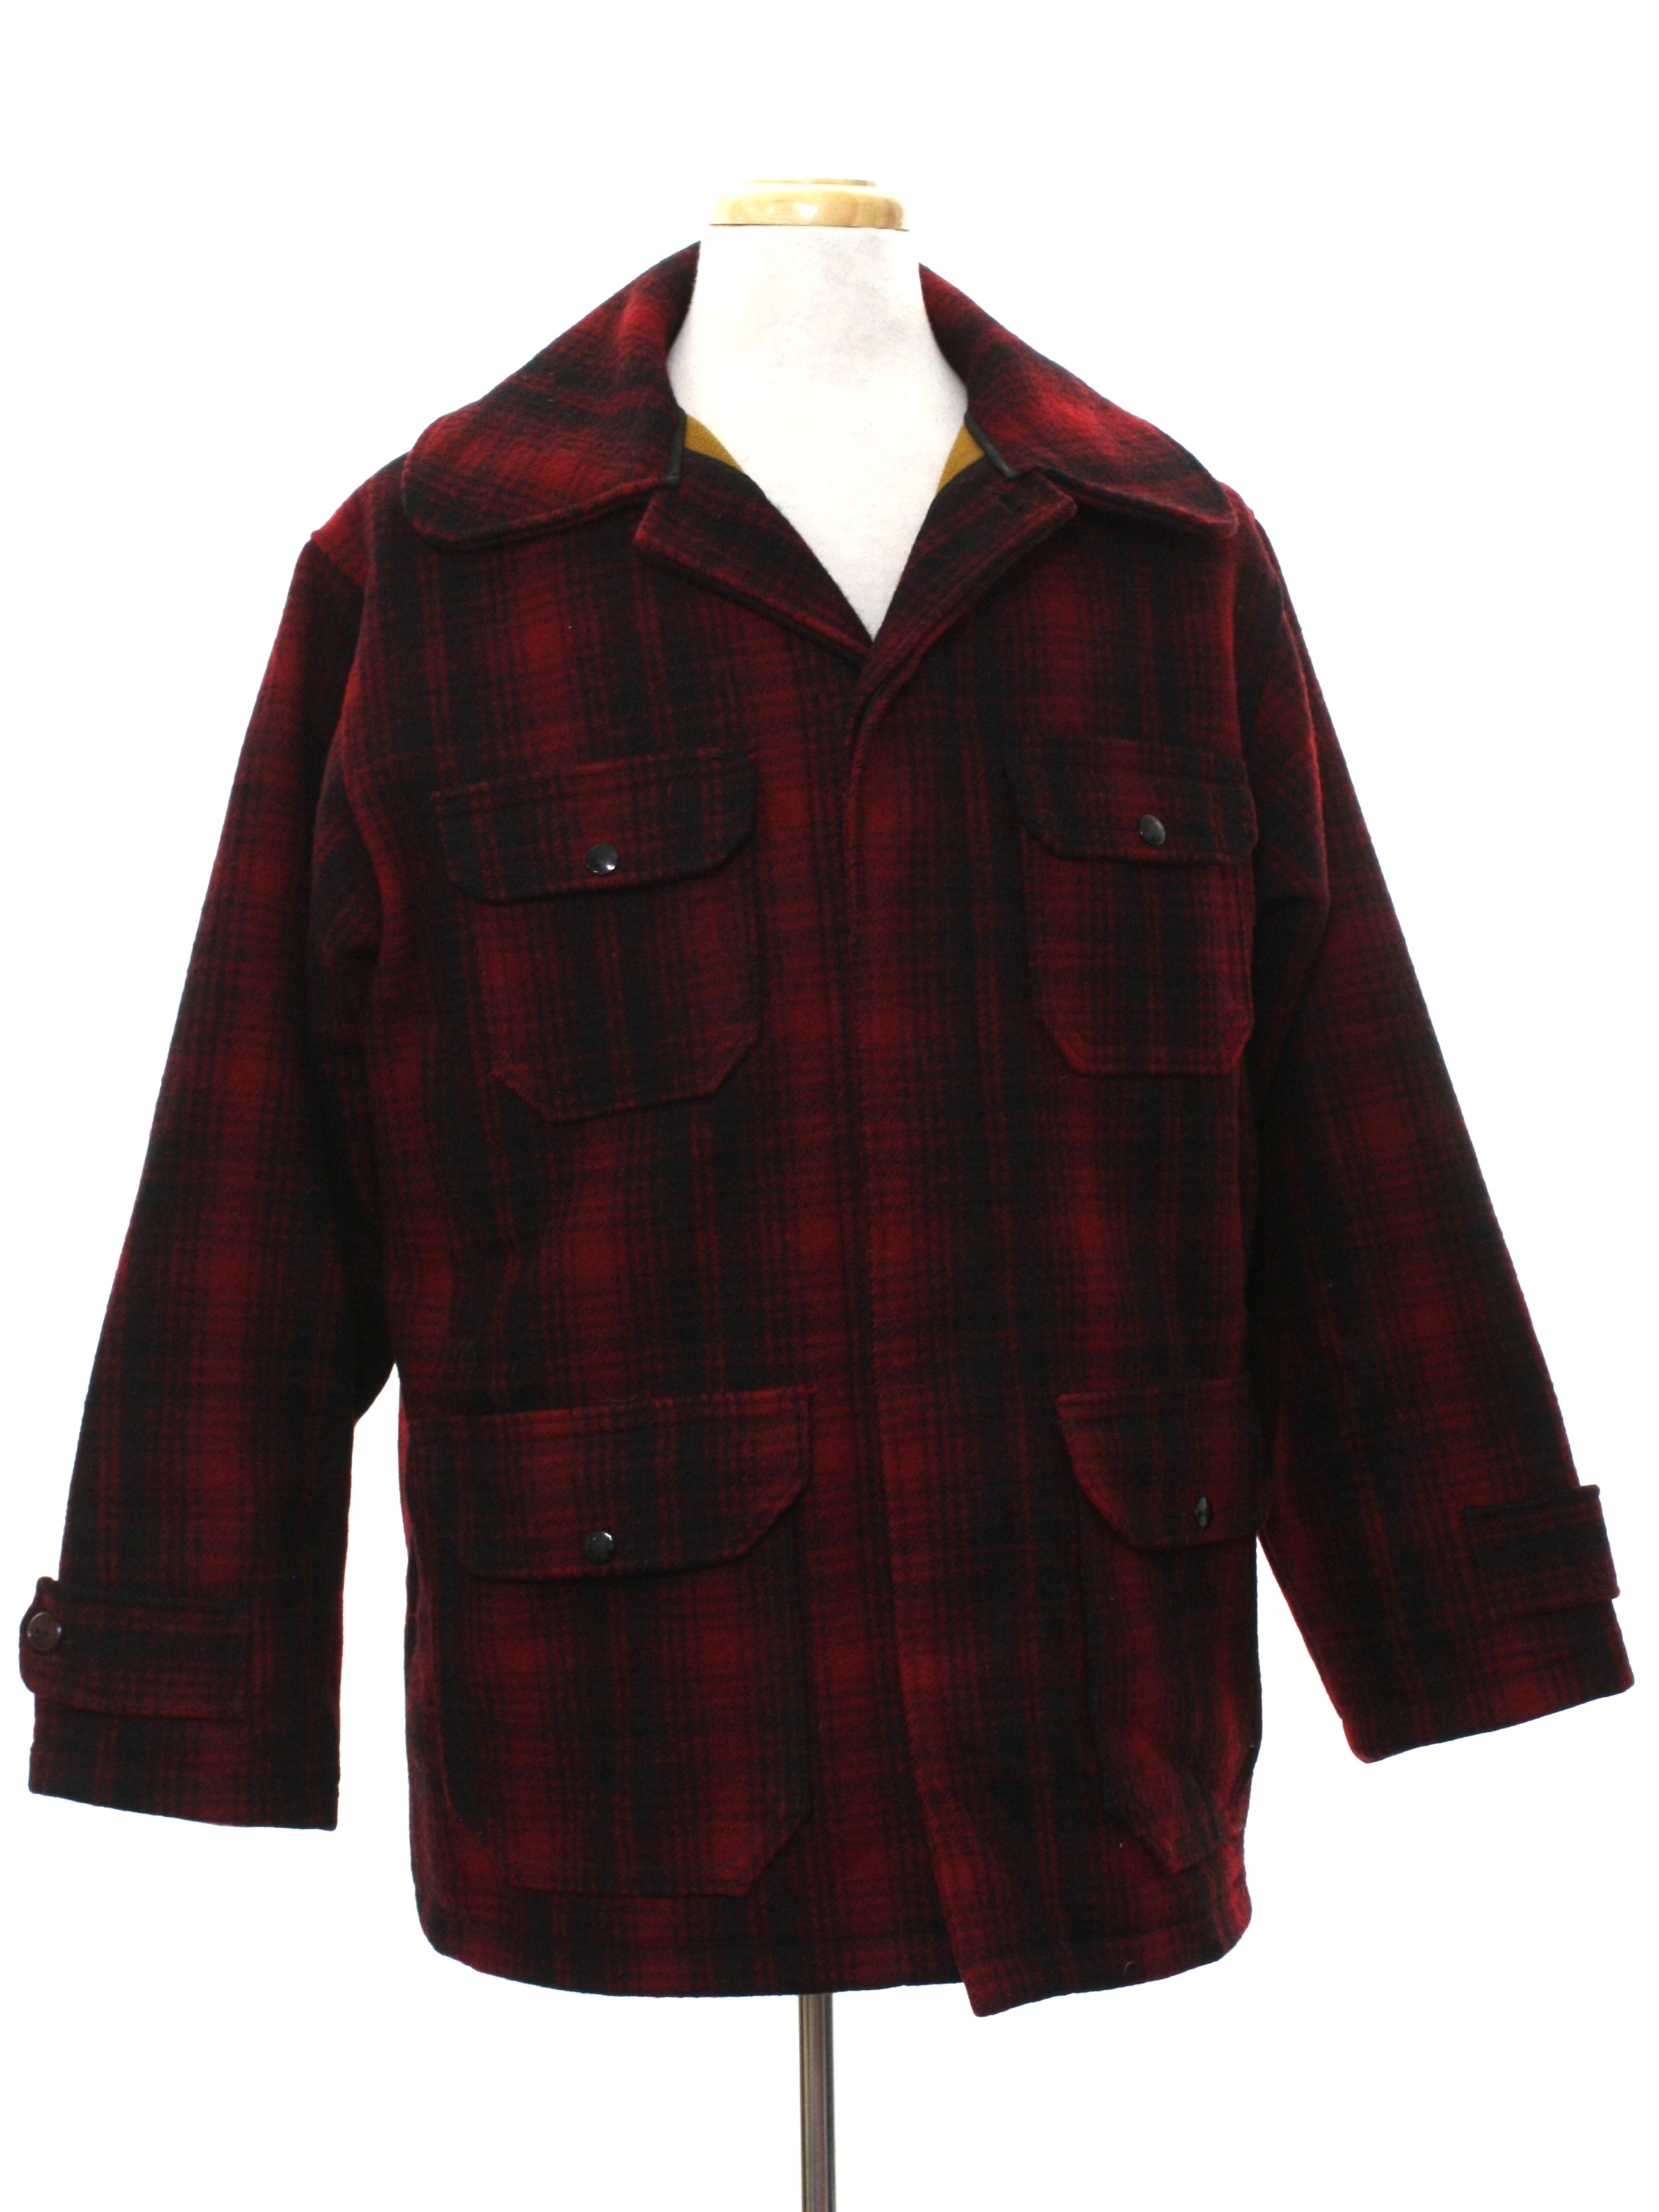 Retro 60's Jacket: Early 60s -Woolrich- Mens red background, black ...